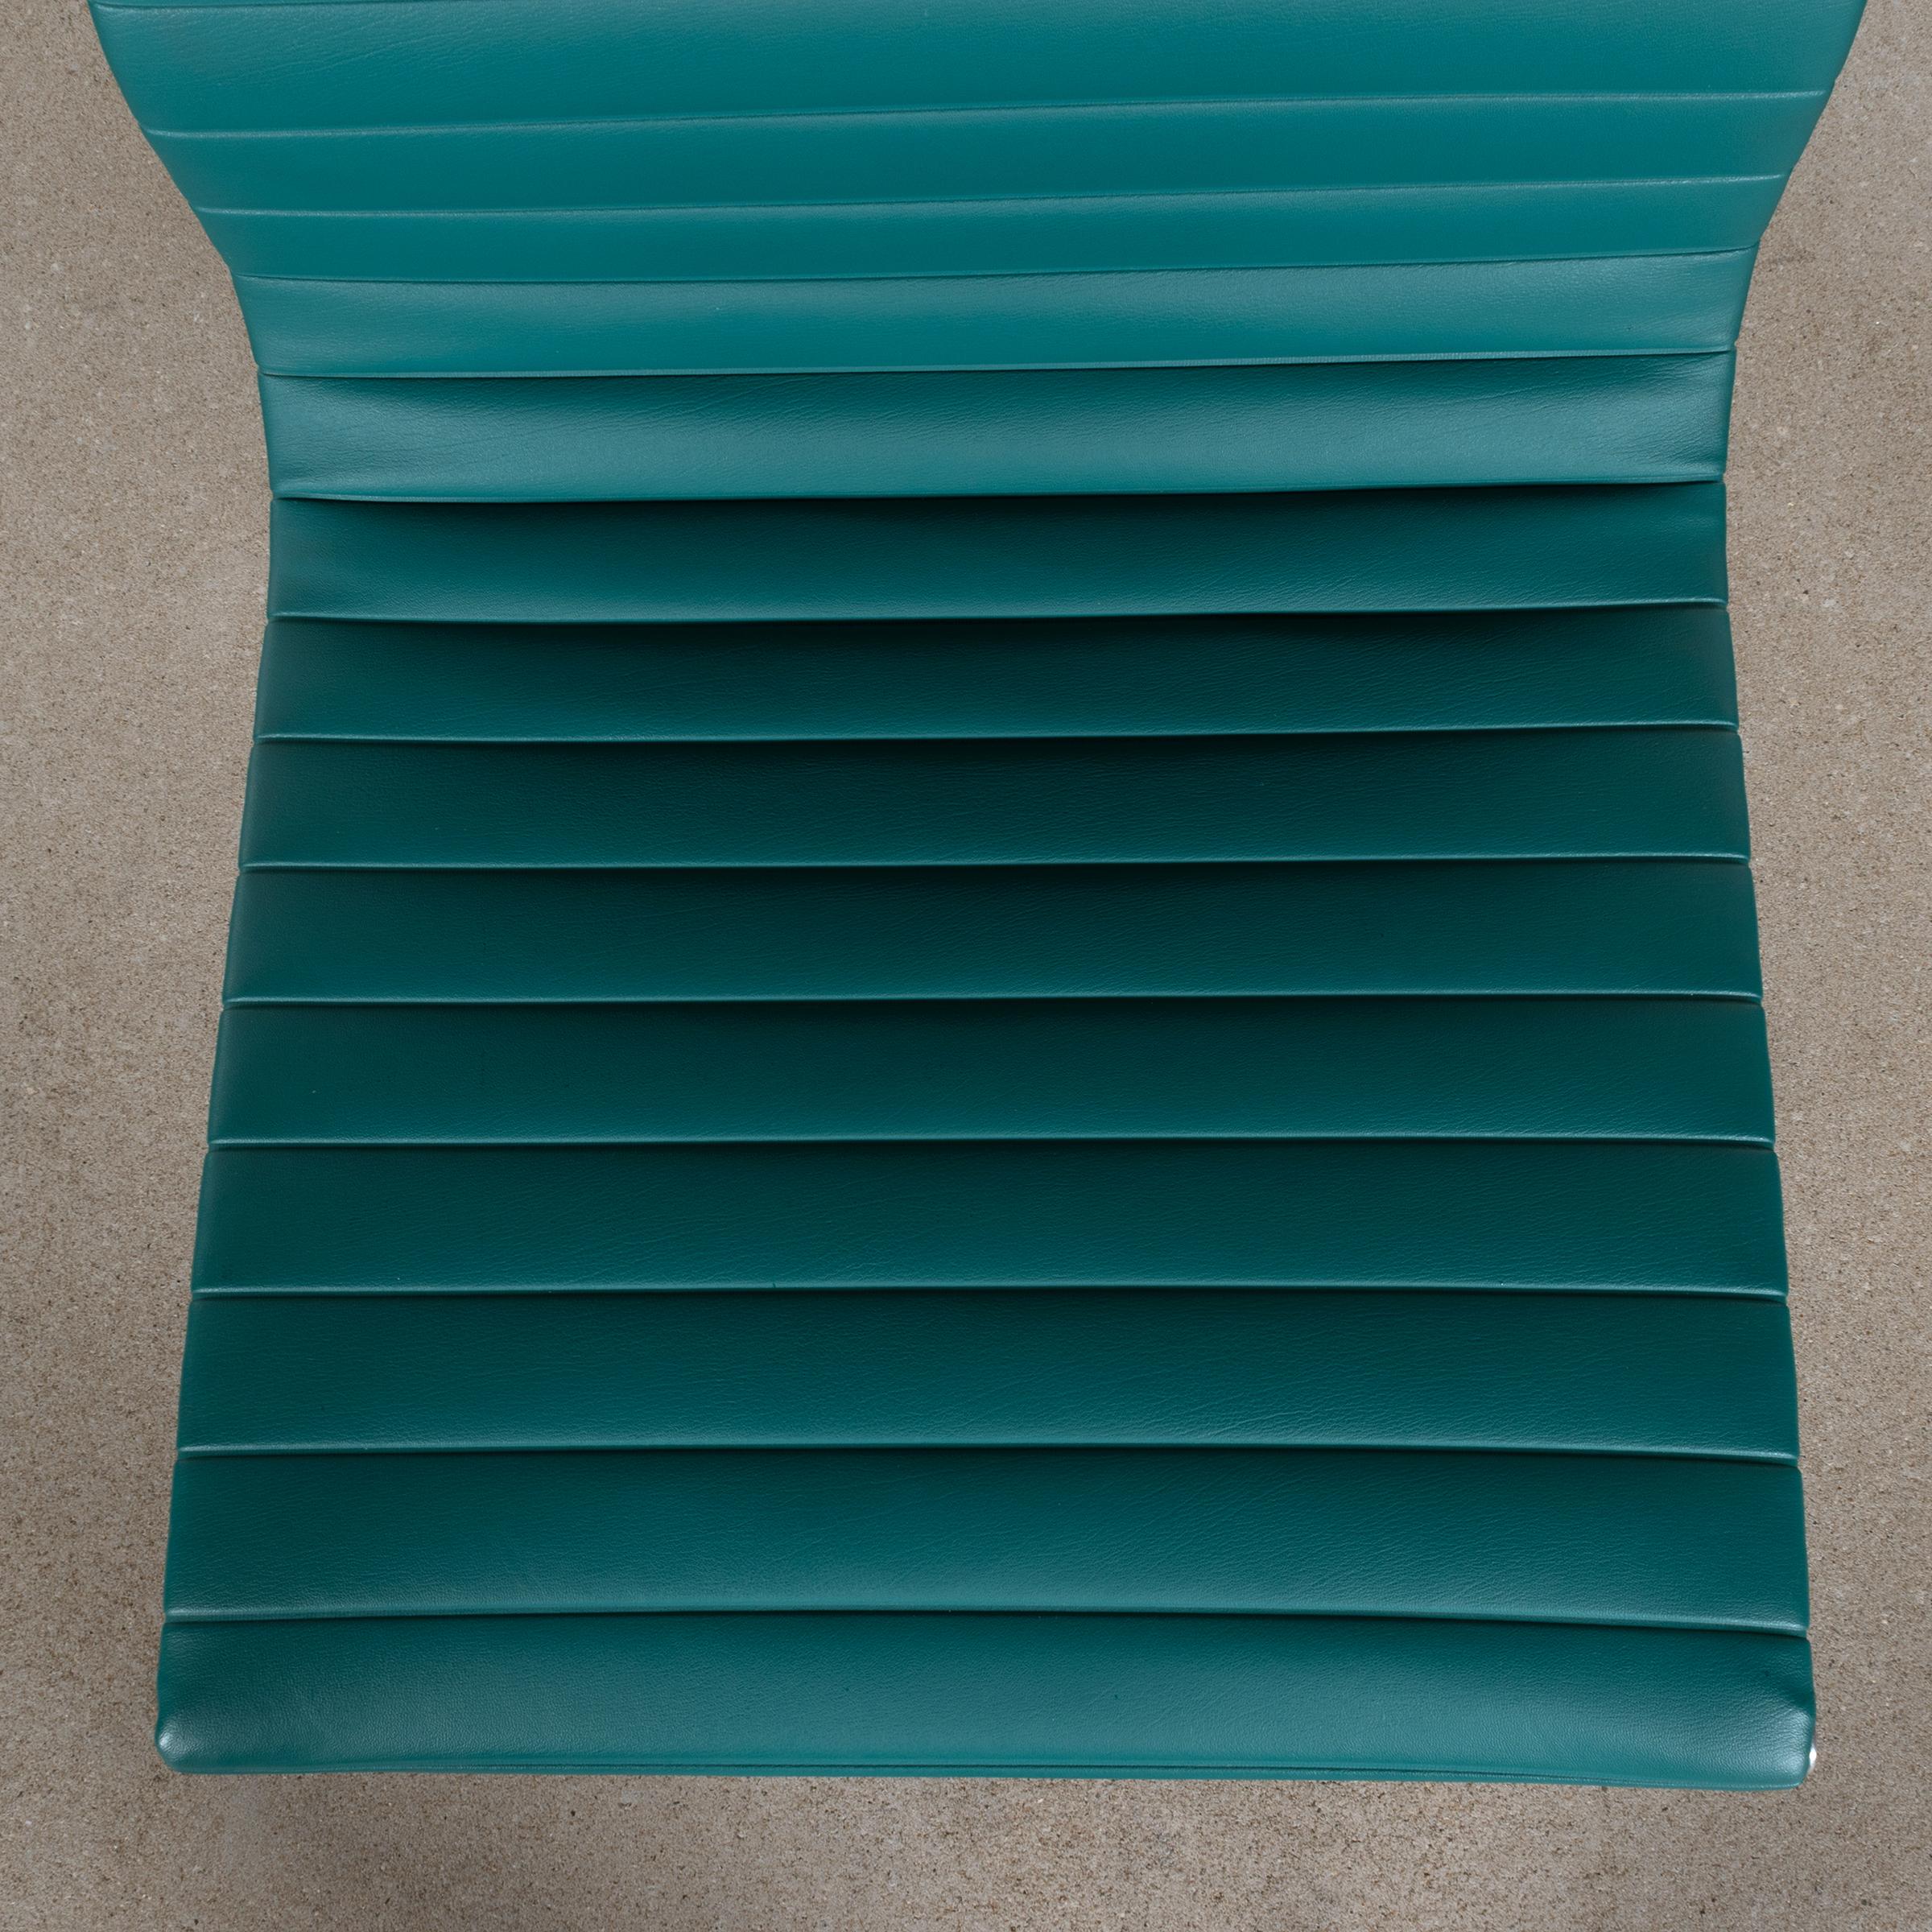 Cast Eames Conference Chair in Turquoise Vinyl for Herman Miller, USA